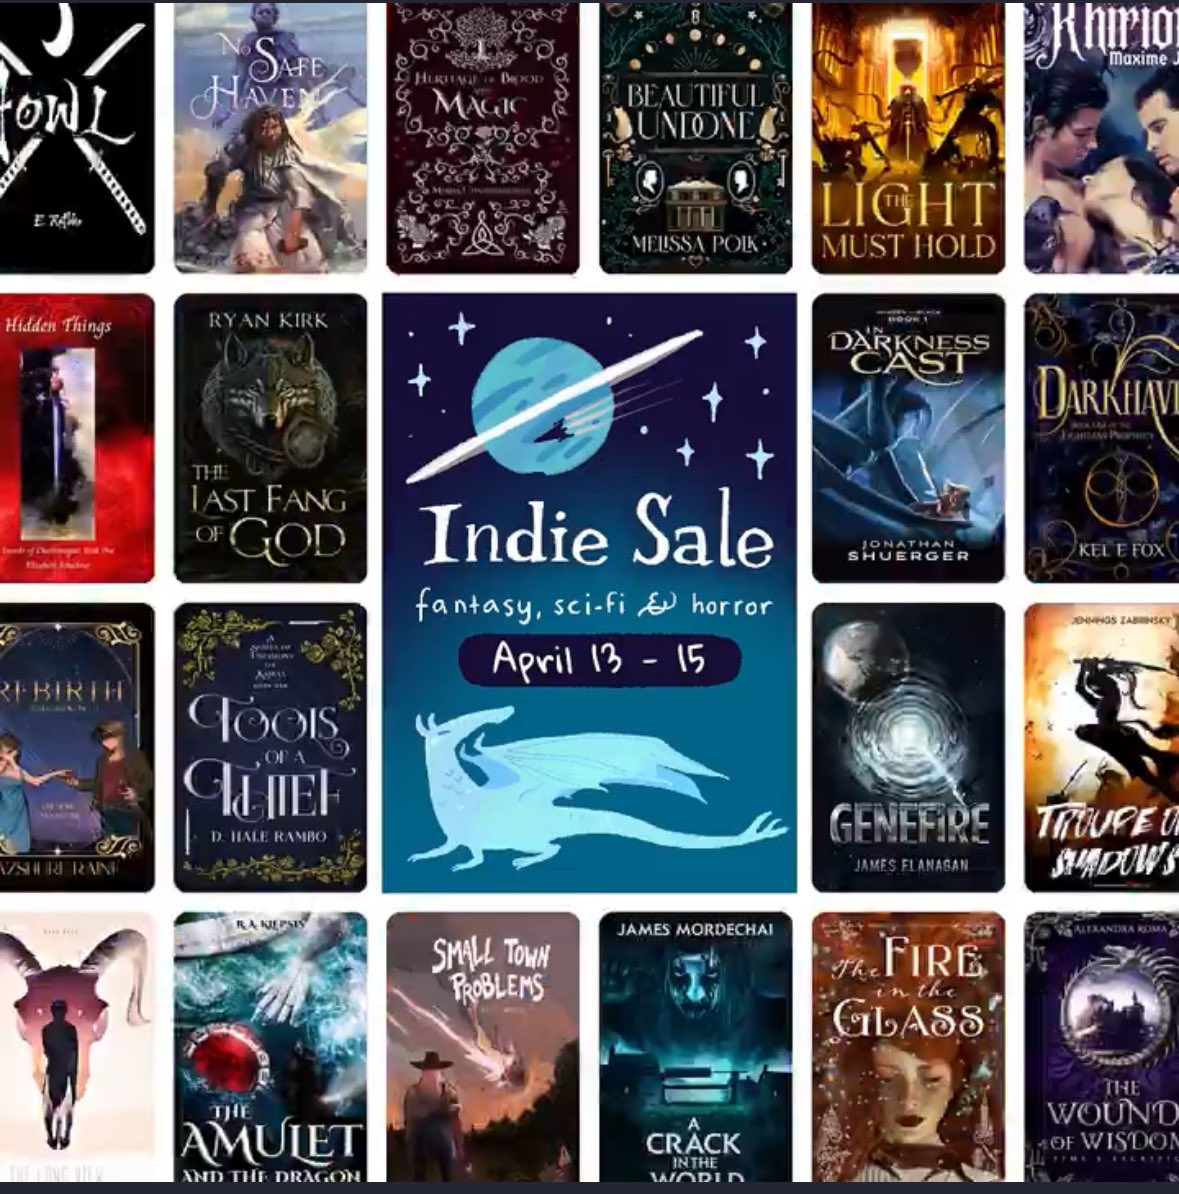 Check out these indie books at indiebook.sale for indie April between April 13-15th hosted by @Narratess Heritage of Blood and Magic e-book is now only $0.99🤩